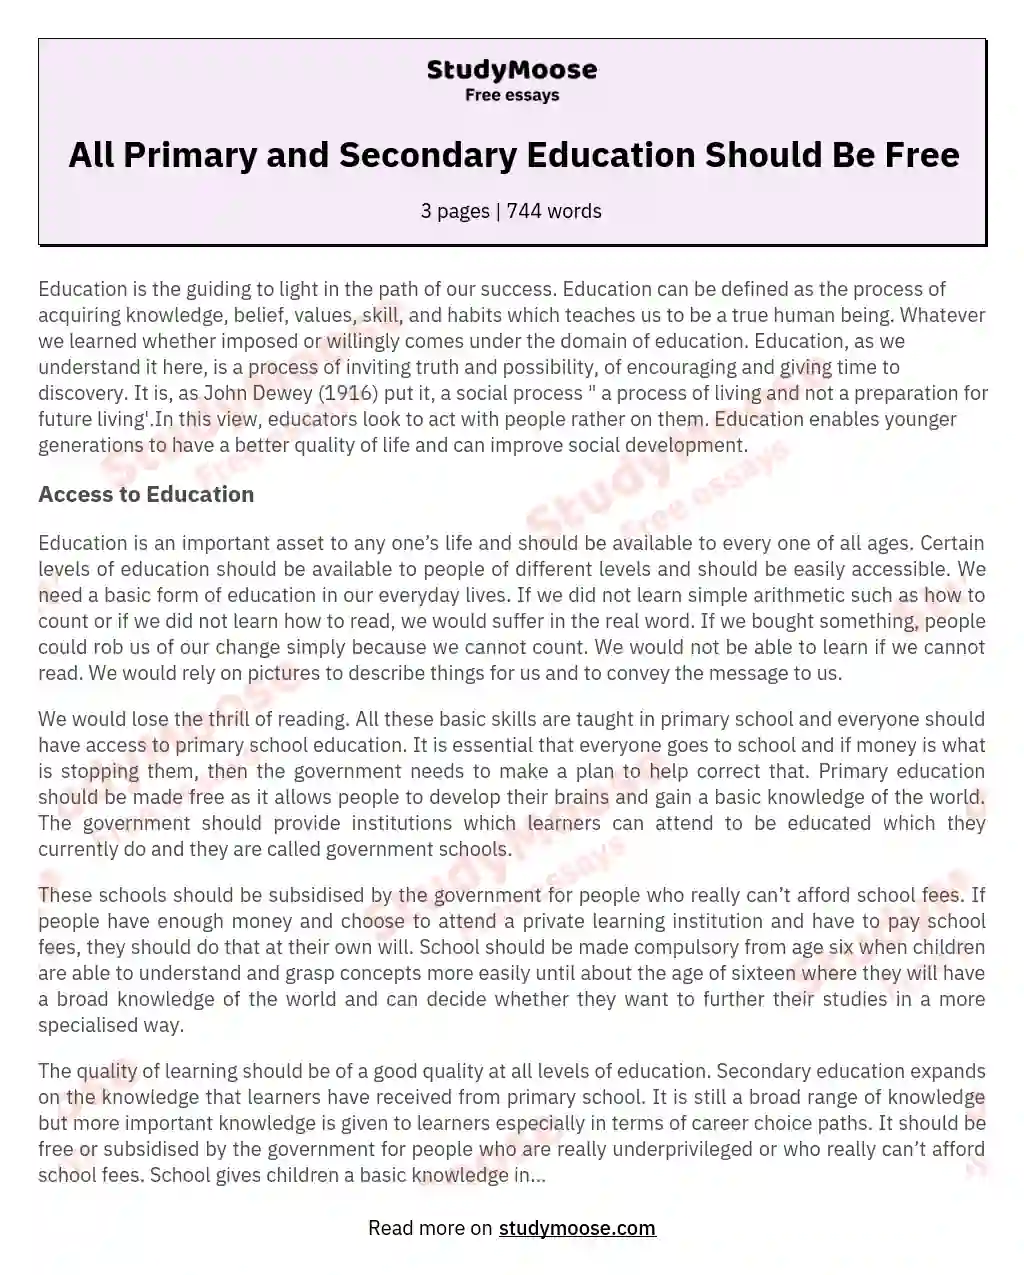 All Primary and Secondary Education Should Be Free essay